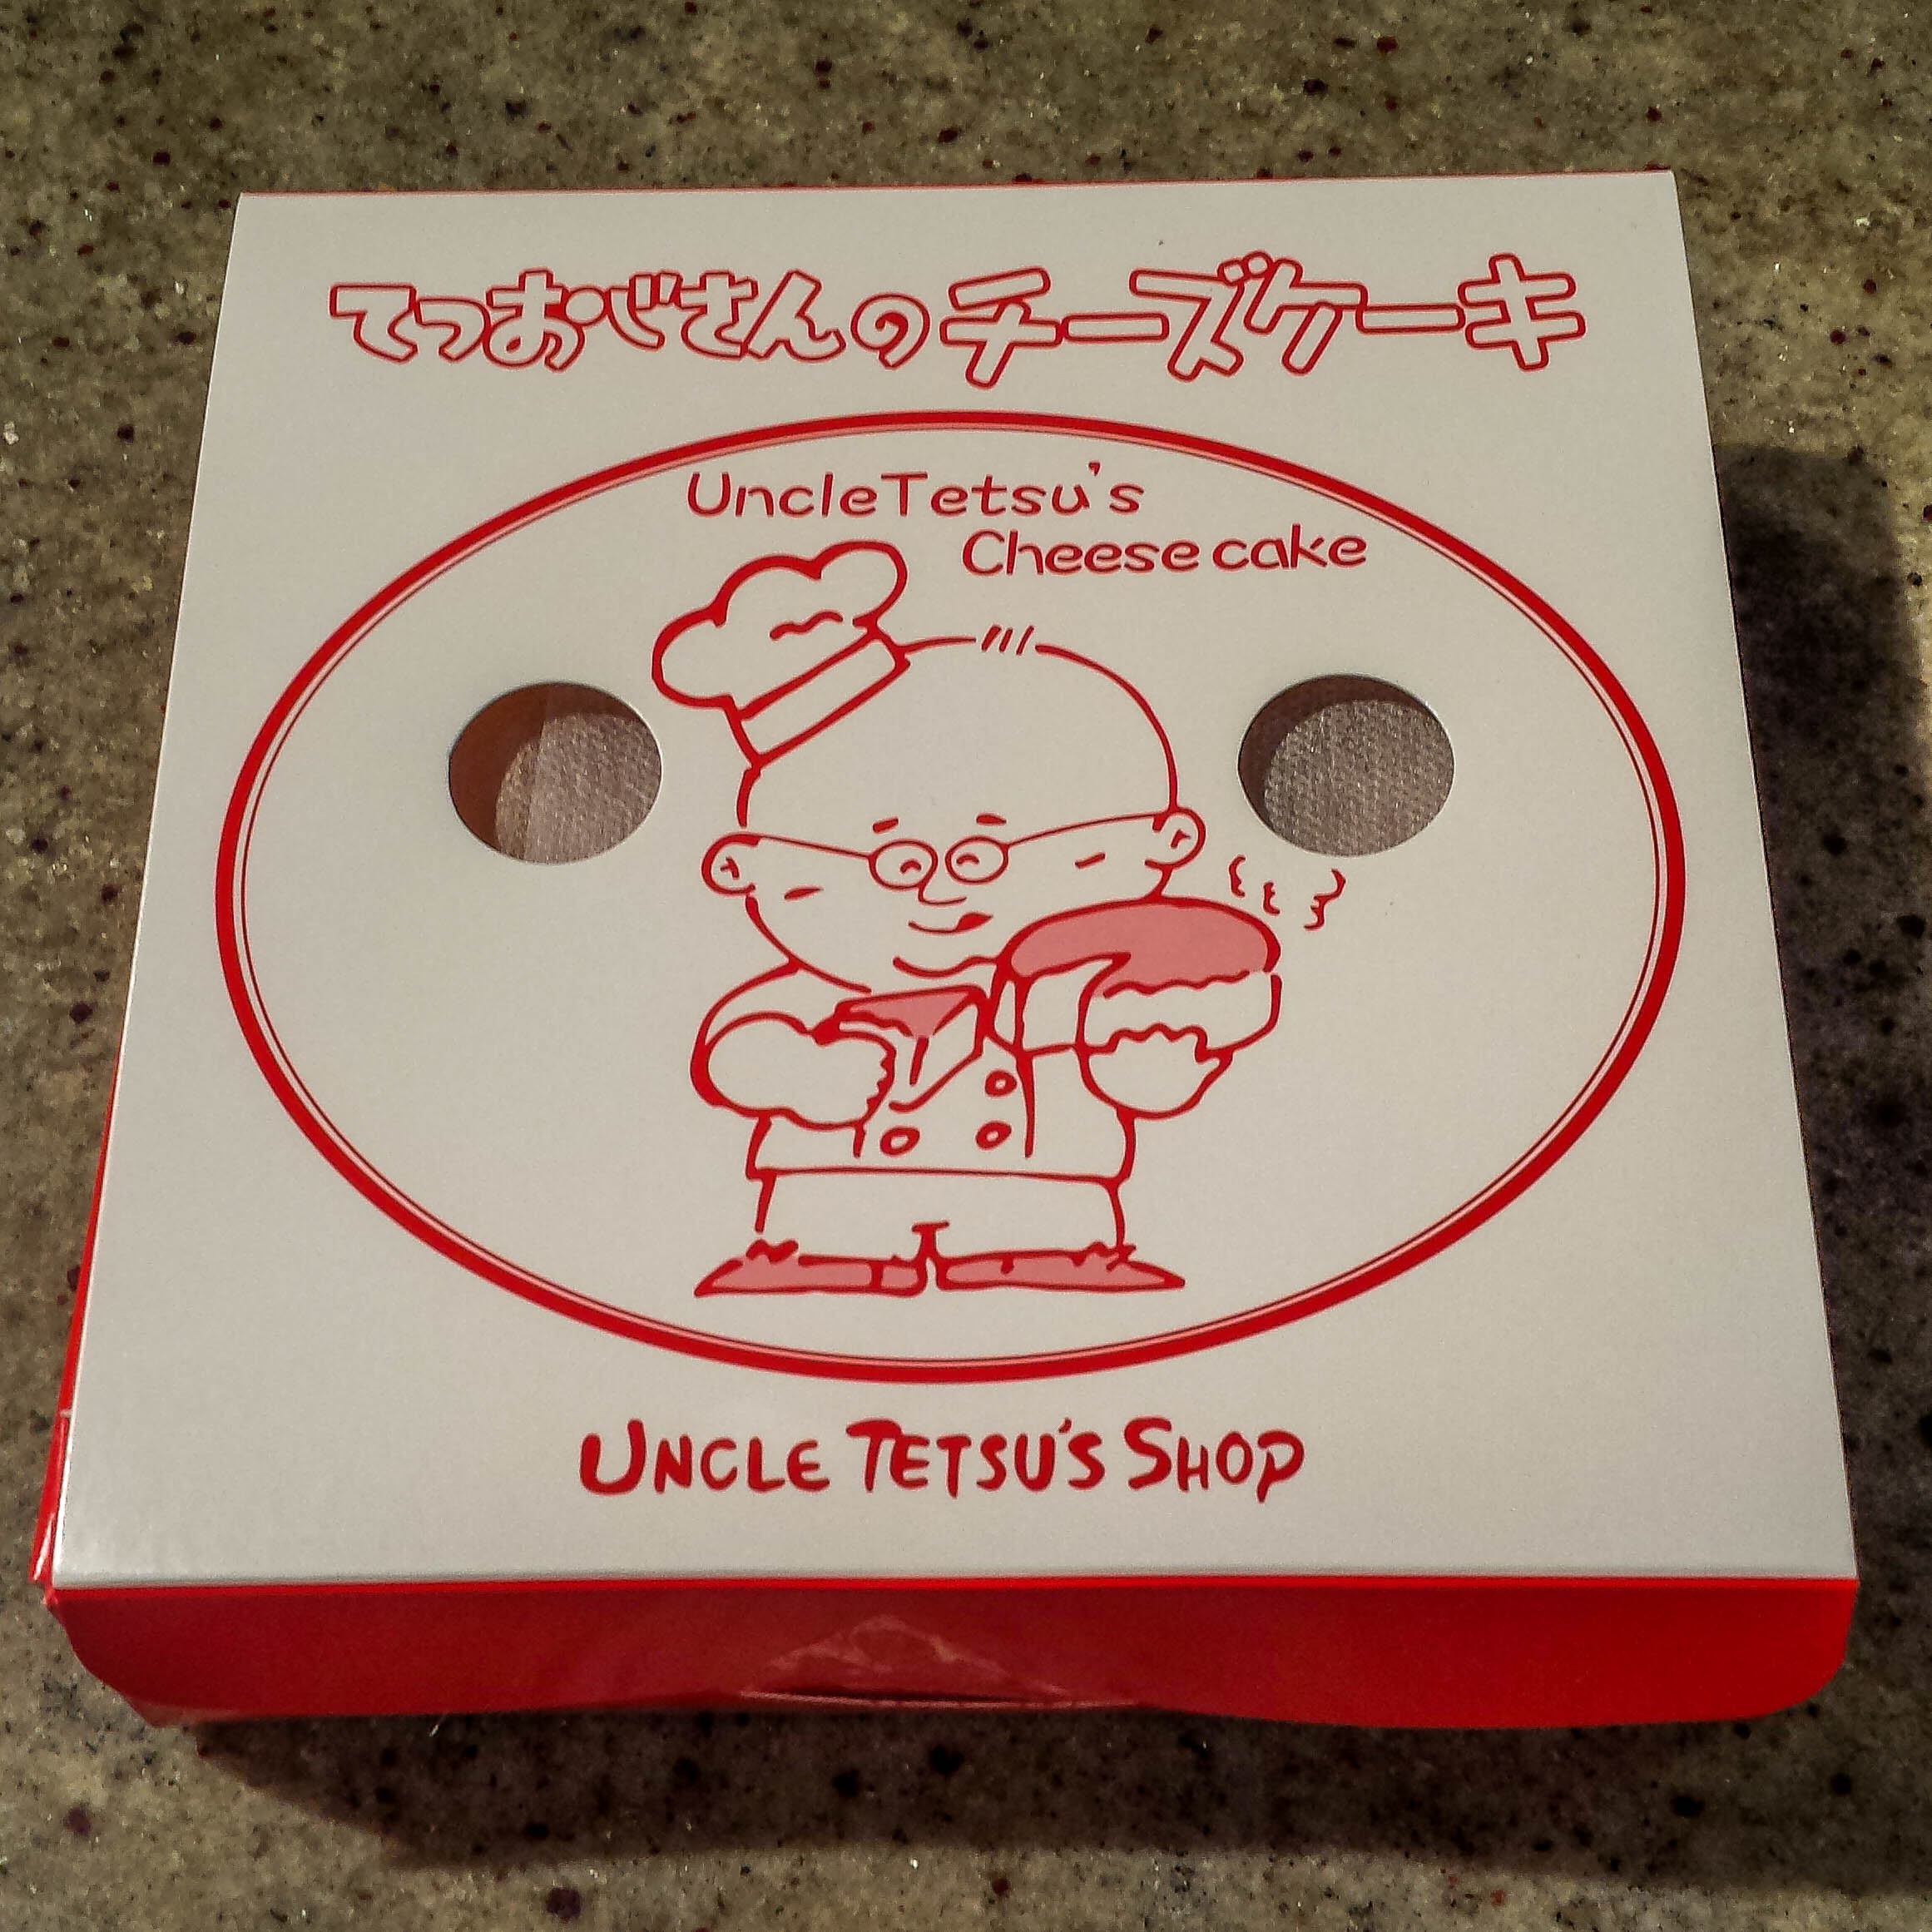 Uncle Tetsu's box for cheesecakes